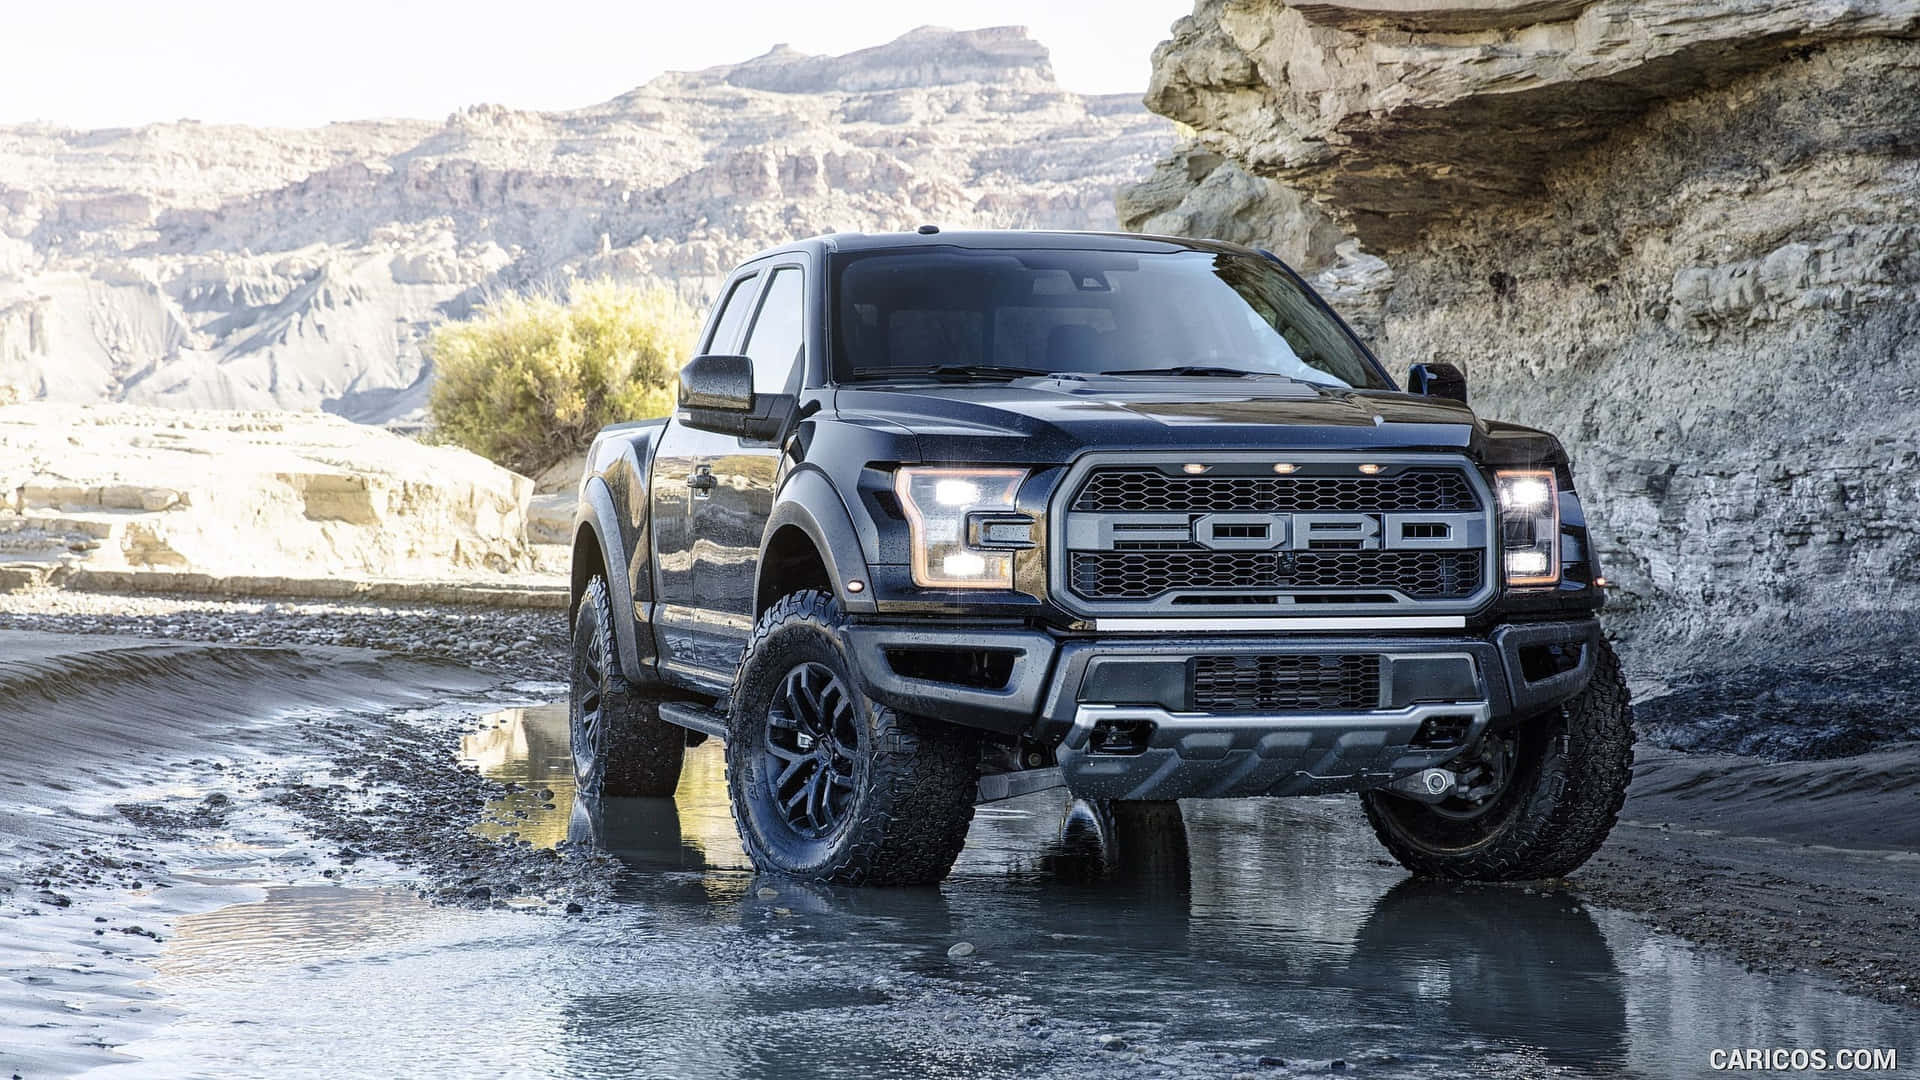 Powerful Ford Truck Background